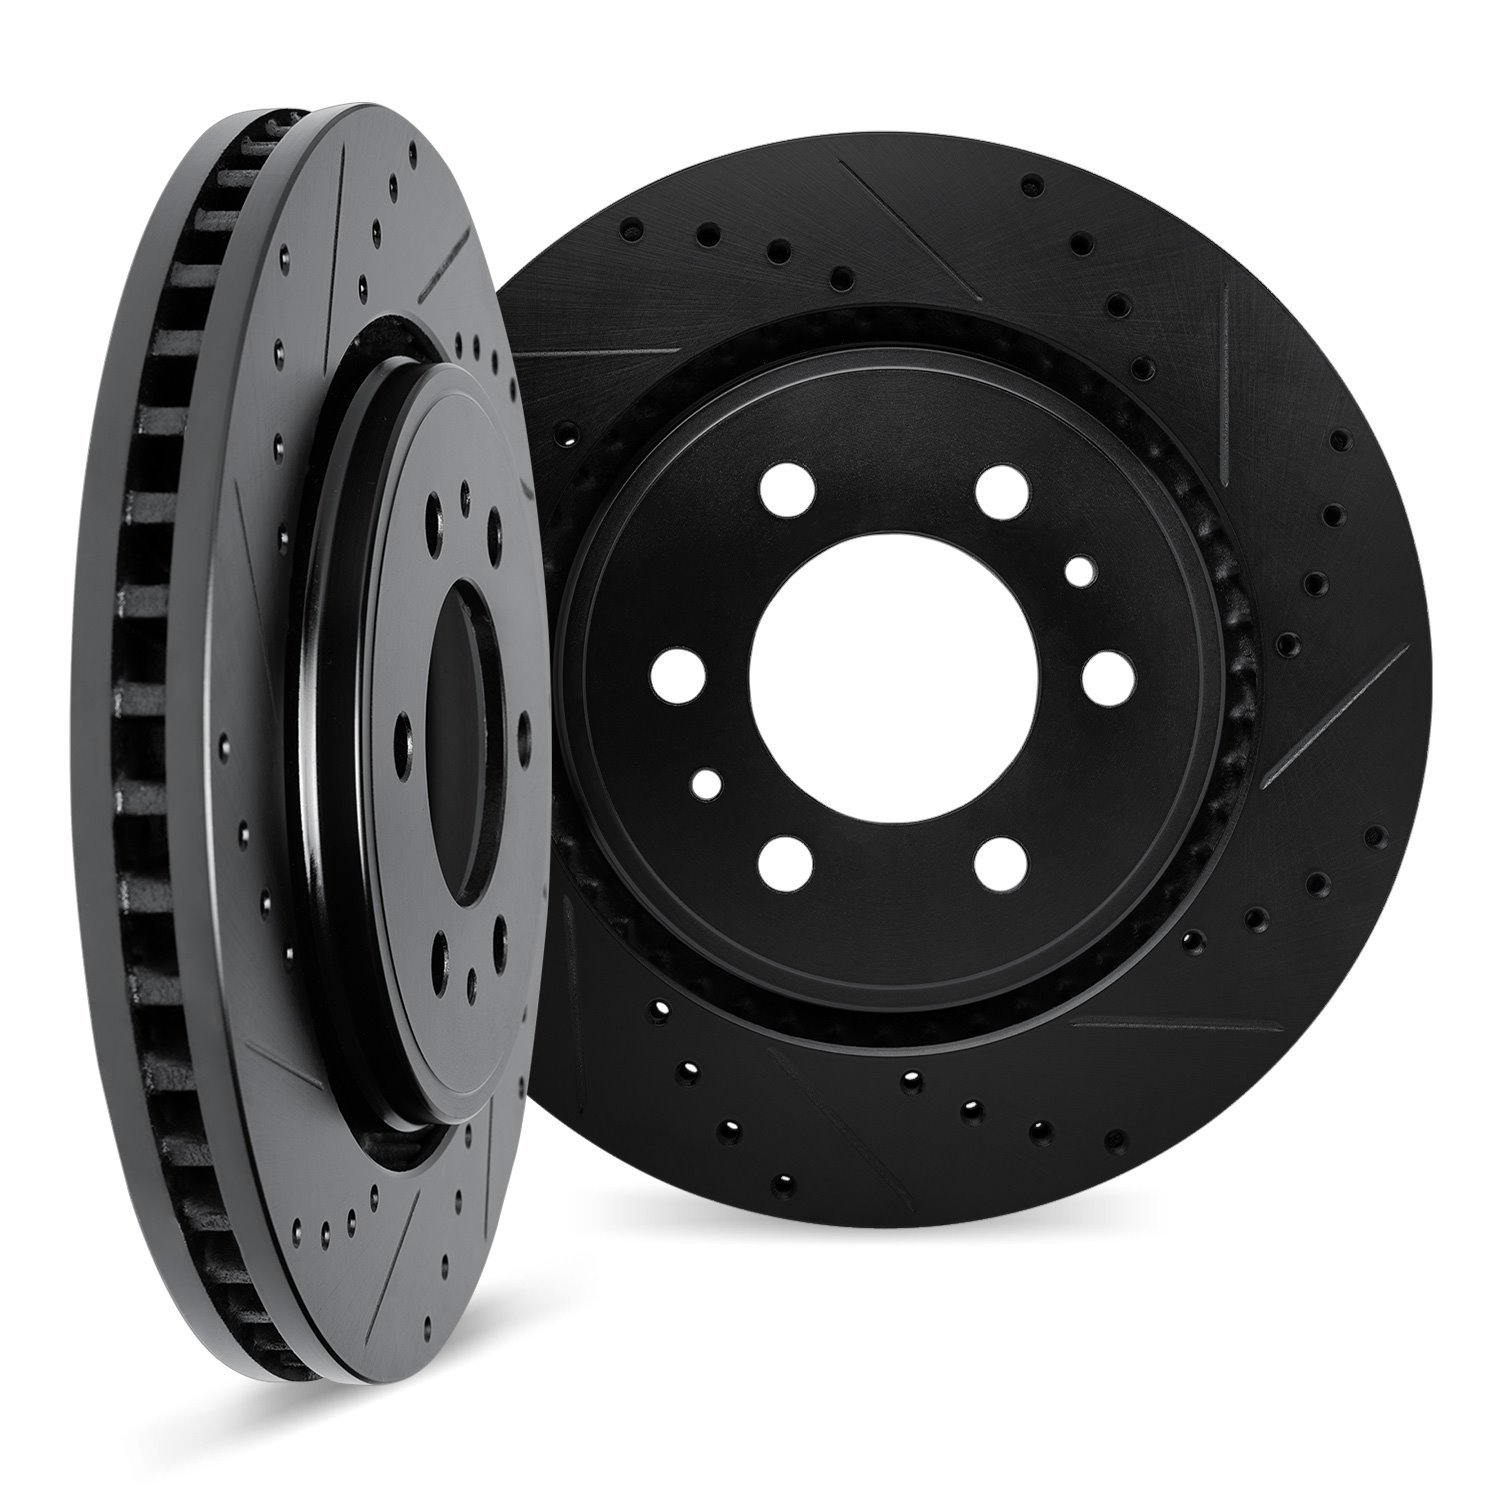 8002-47071 Drilled/Slotted Brake Rotors [Black], Fits Select GM, Position: Front